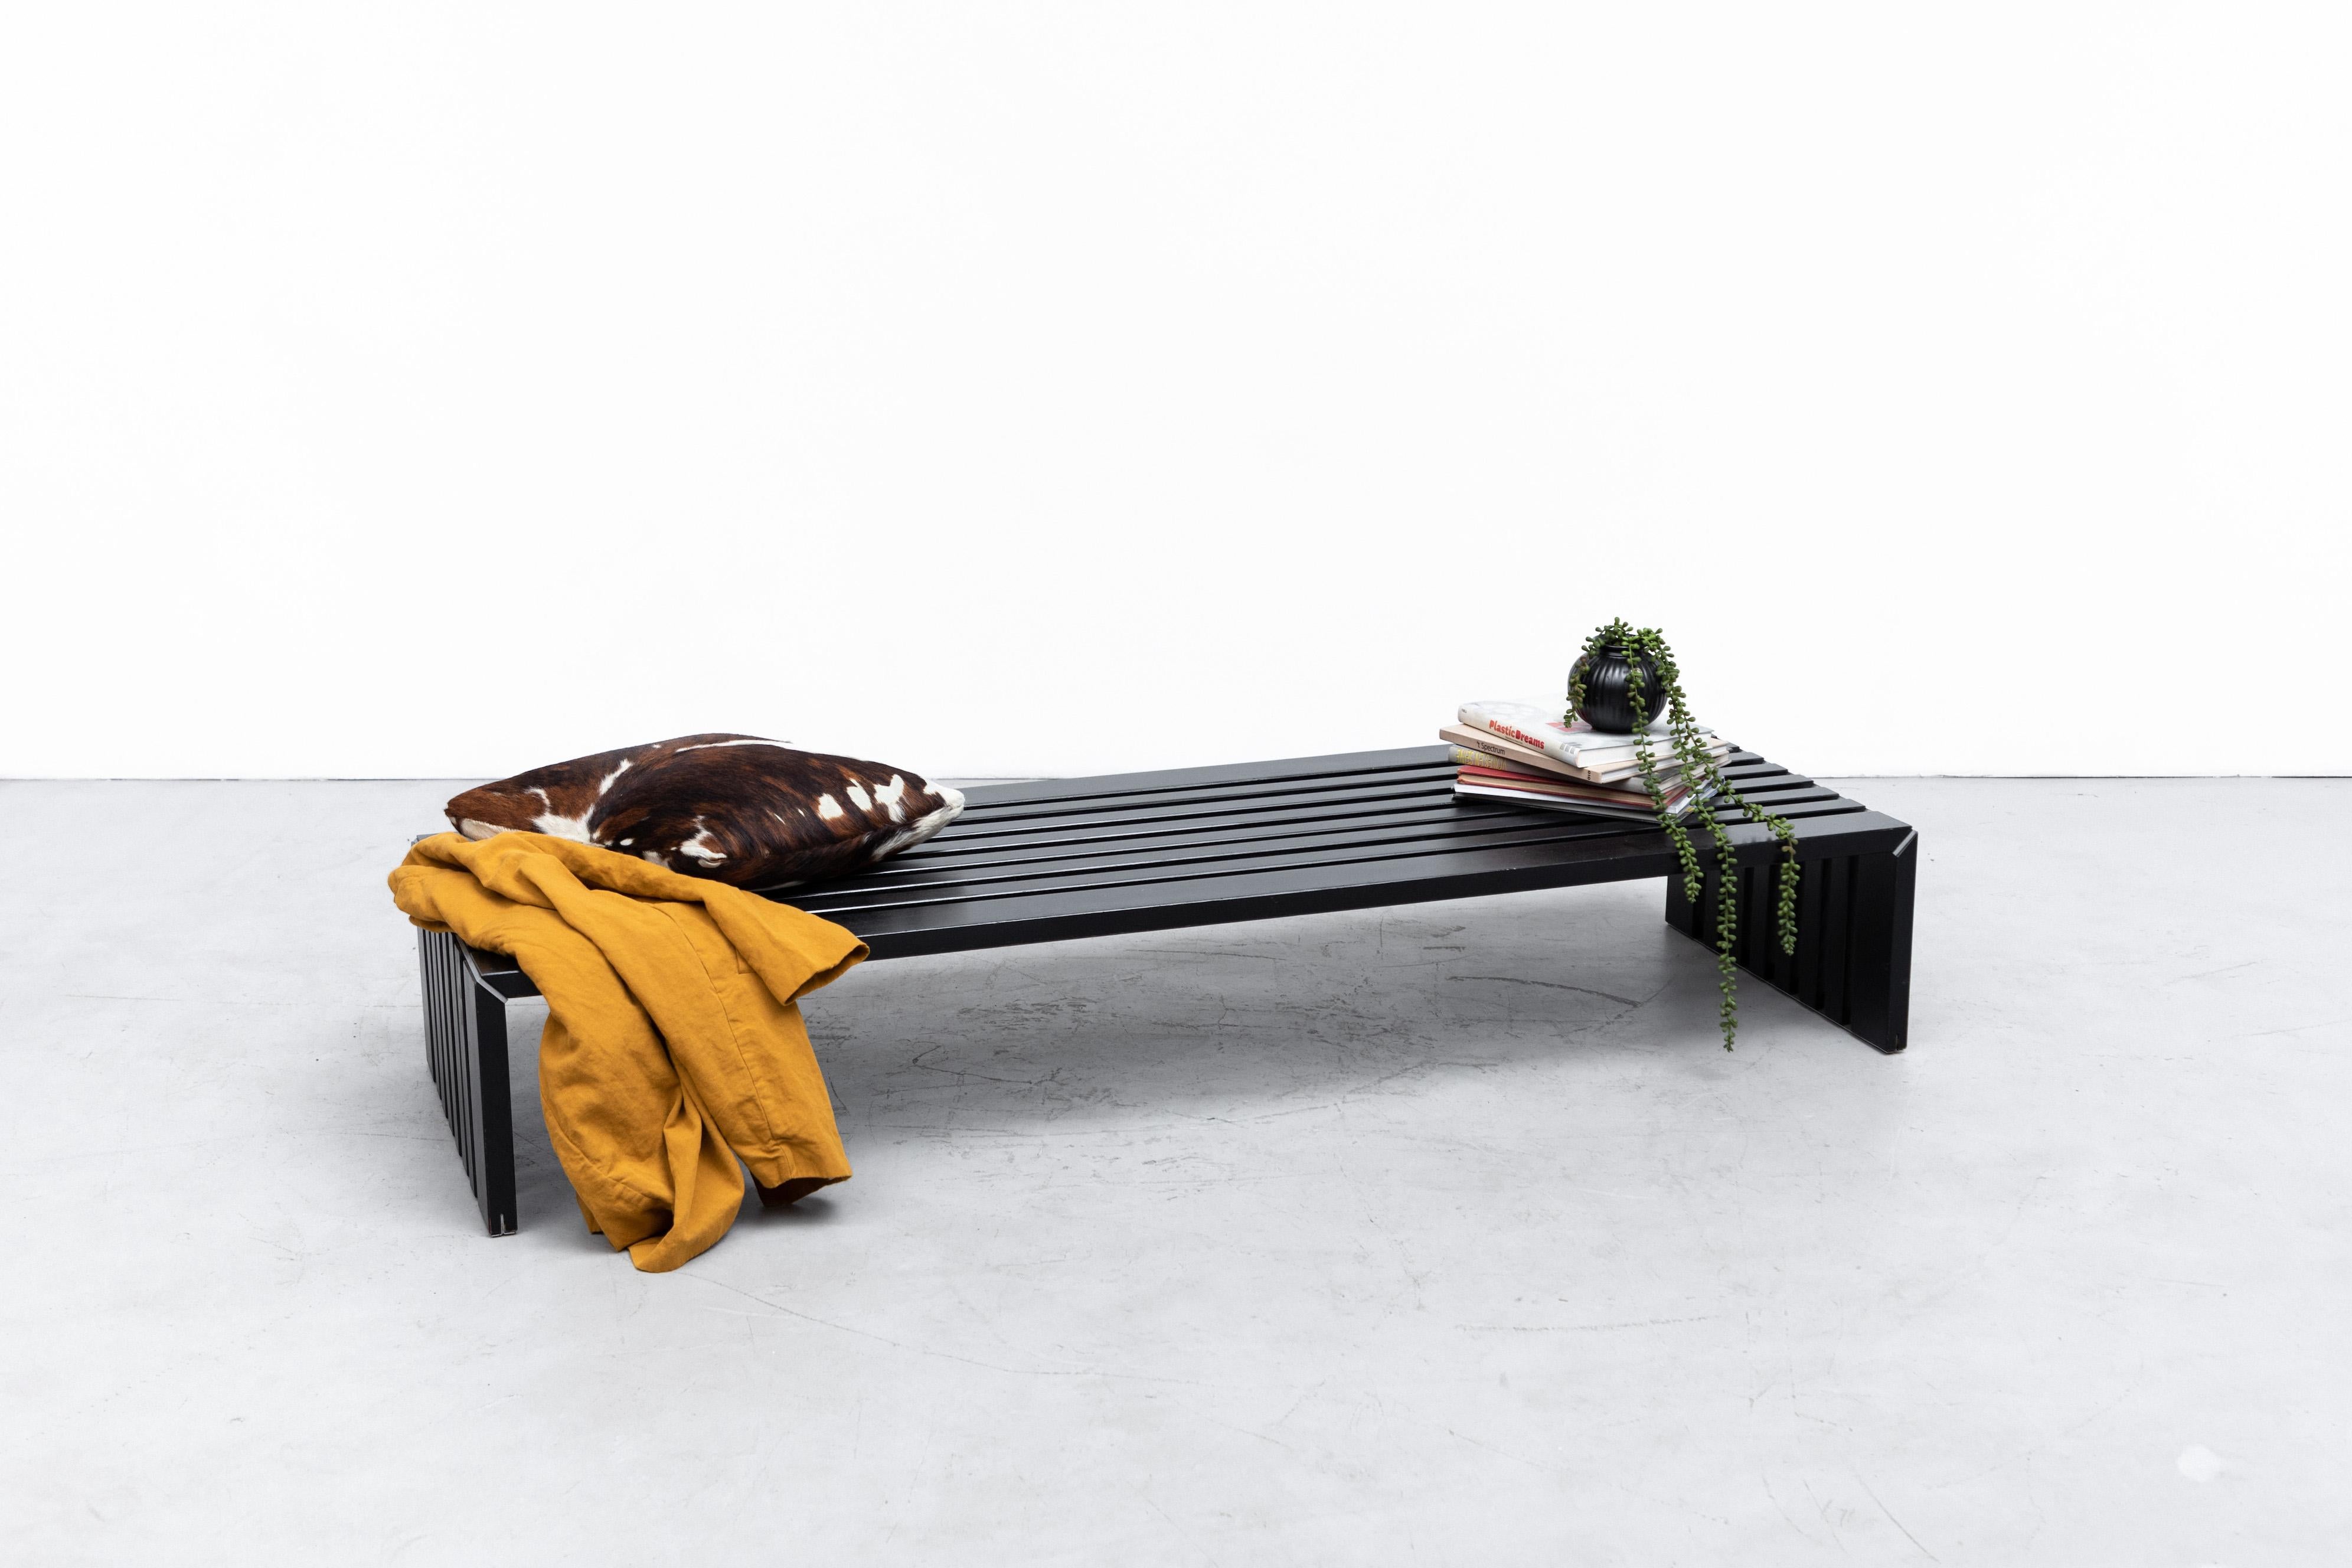 Walter Antonis 'Passe Partout' slat bench with black stained wood slats and steel support accents. Lightly refinished with light wear consistent with age and use. Another one also available in natural ash (LU922424105502). Listed separately.